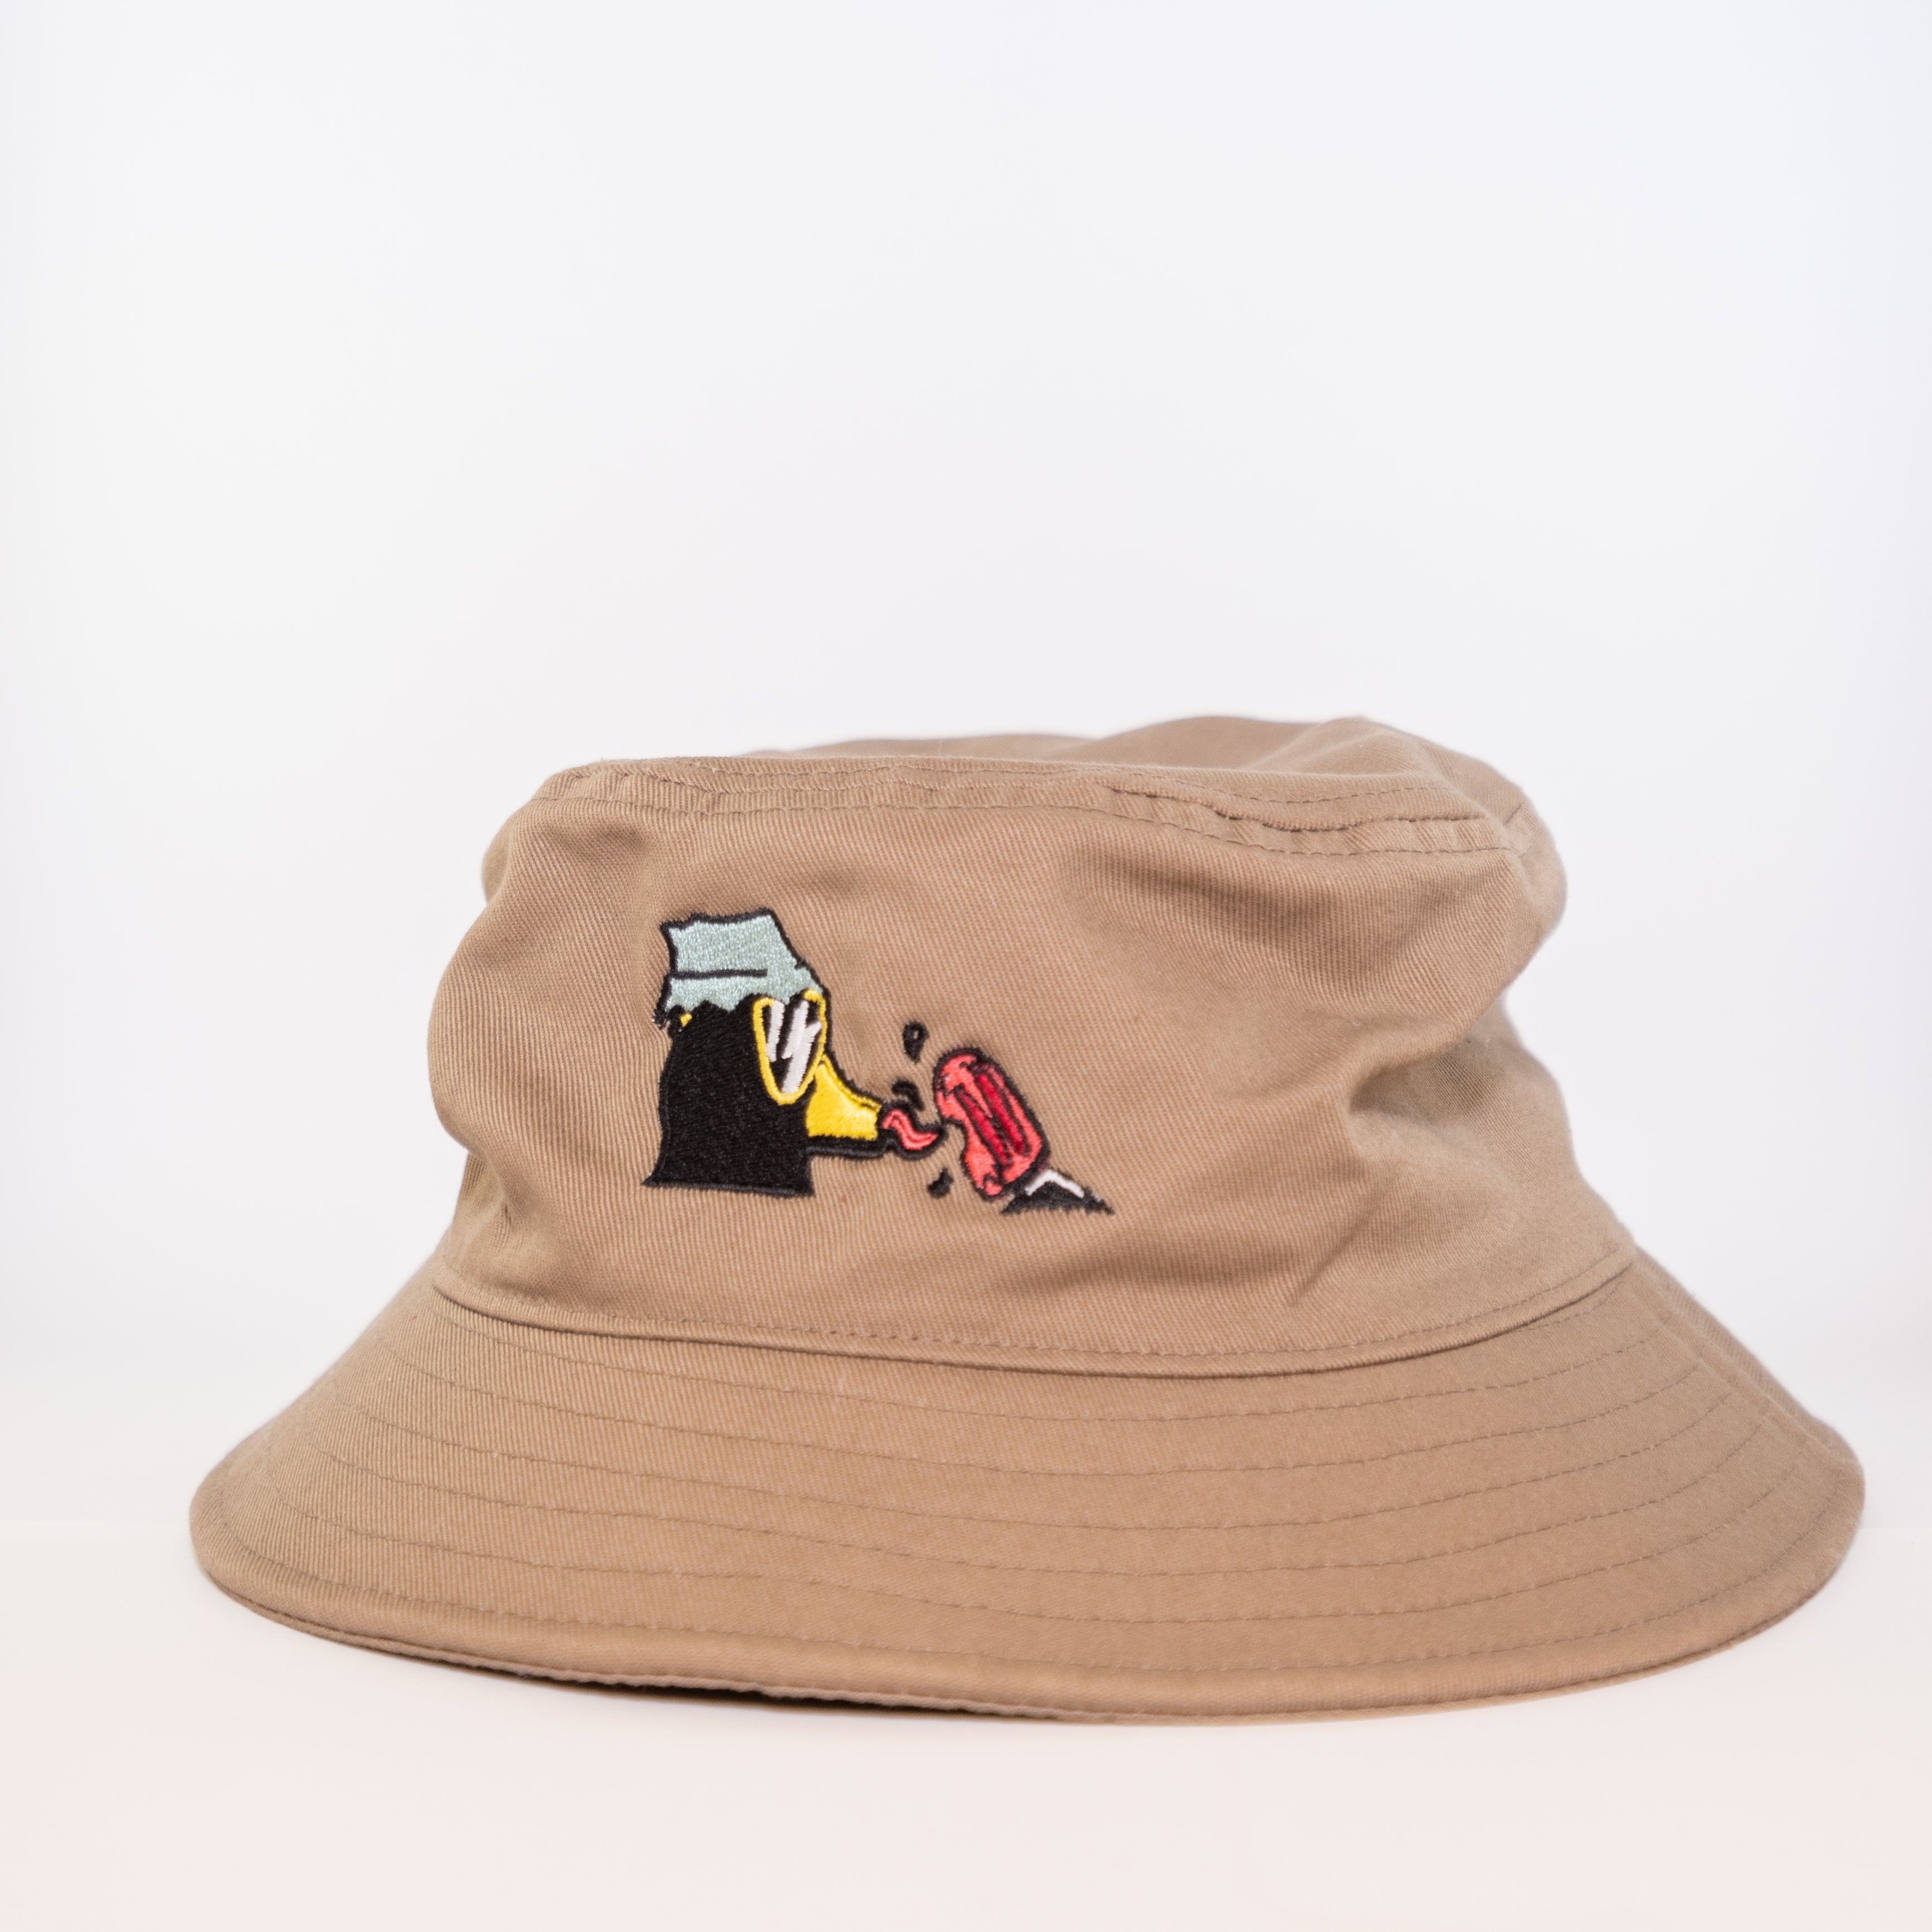 Stay Cool New Zealand made Bucket Hut Brown